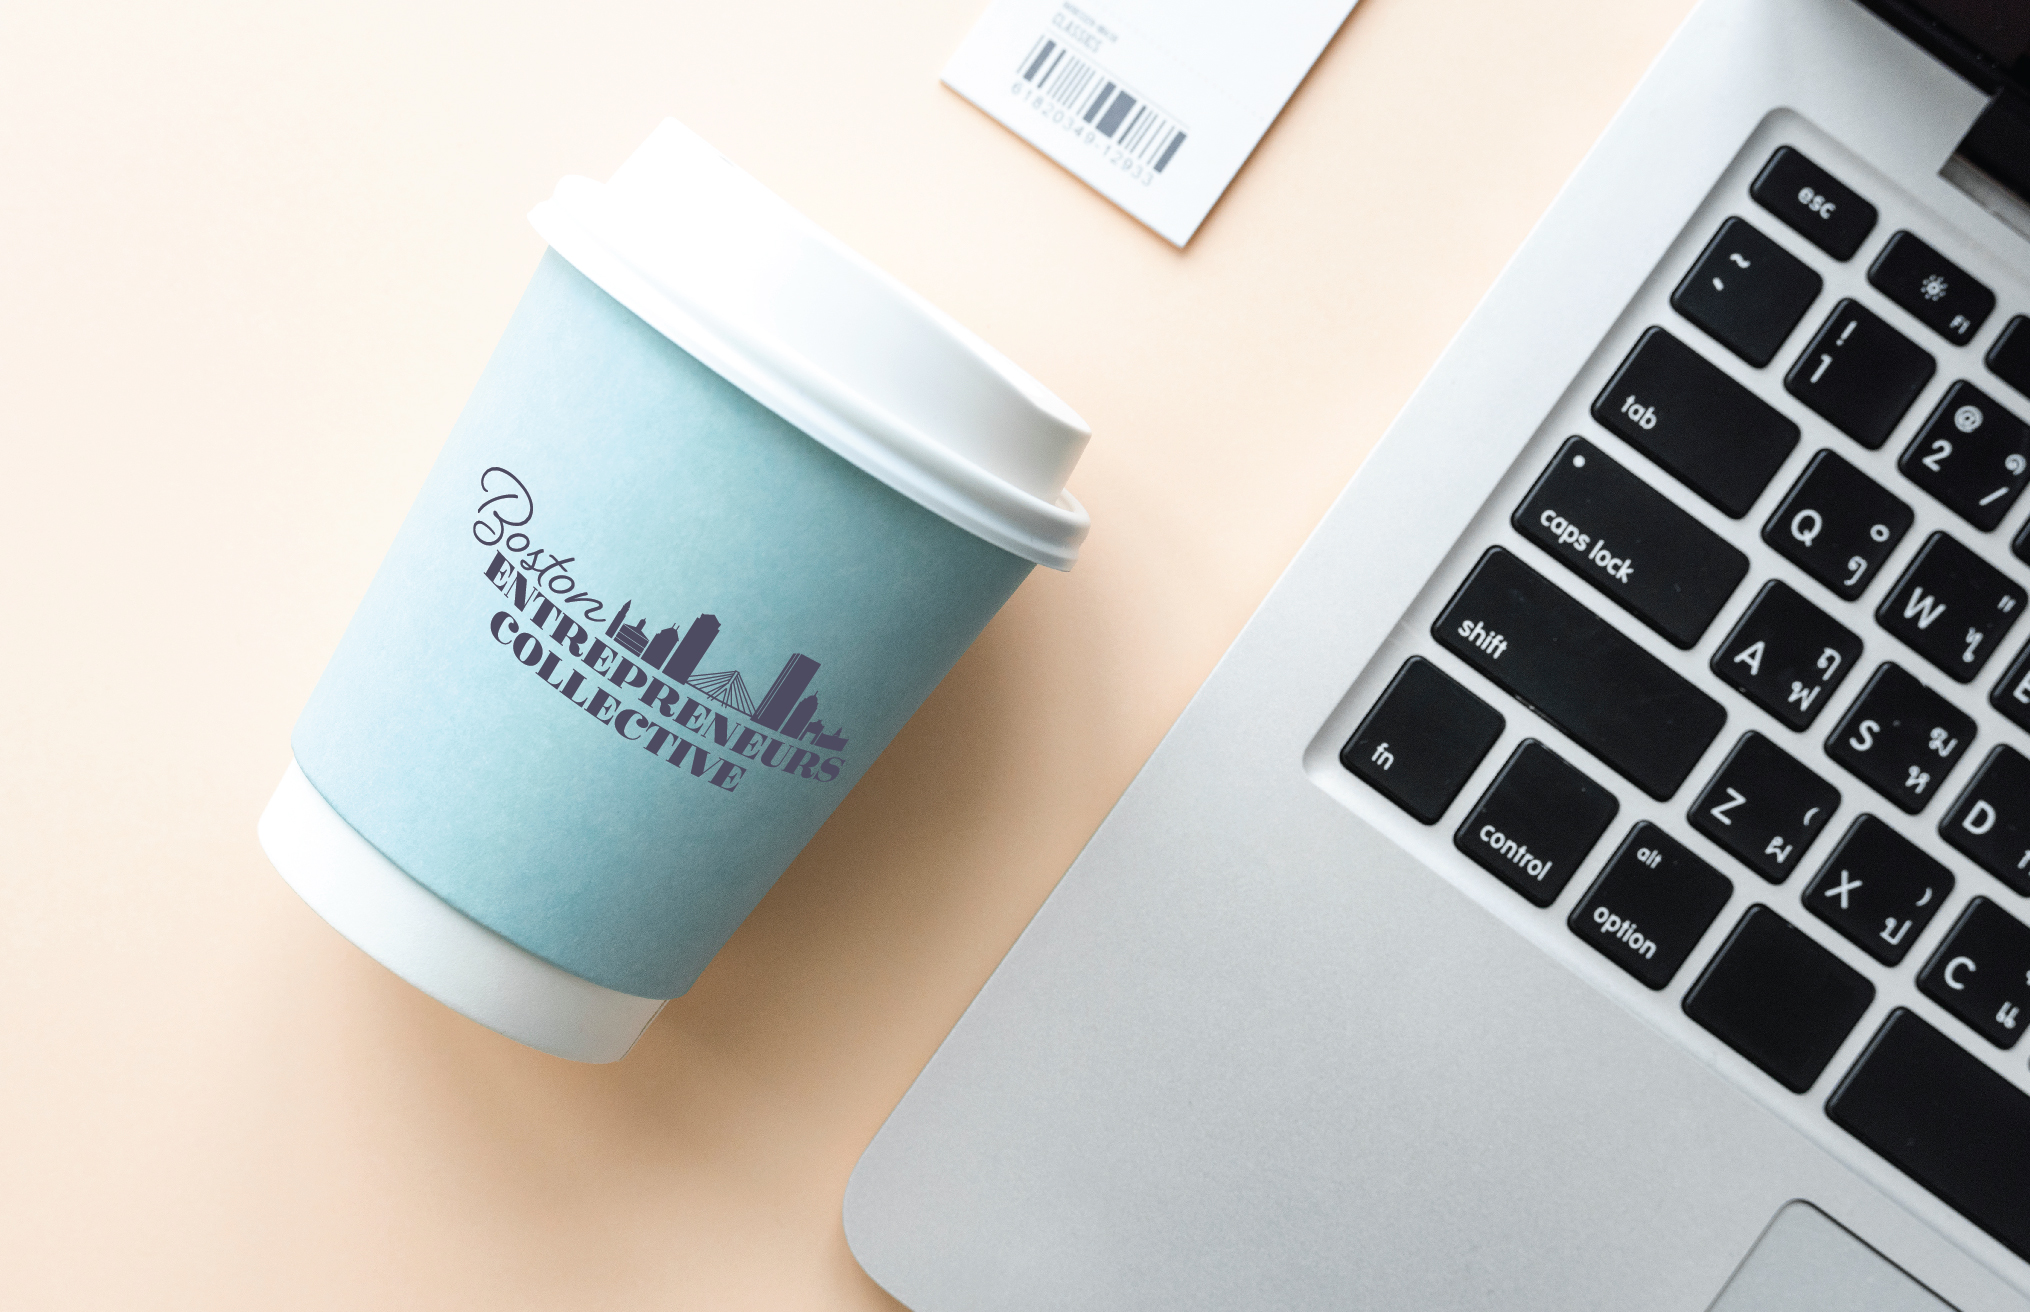 A disposable coffee cup with logo laying next to open laptop in a staged branding photo.